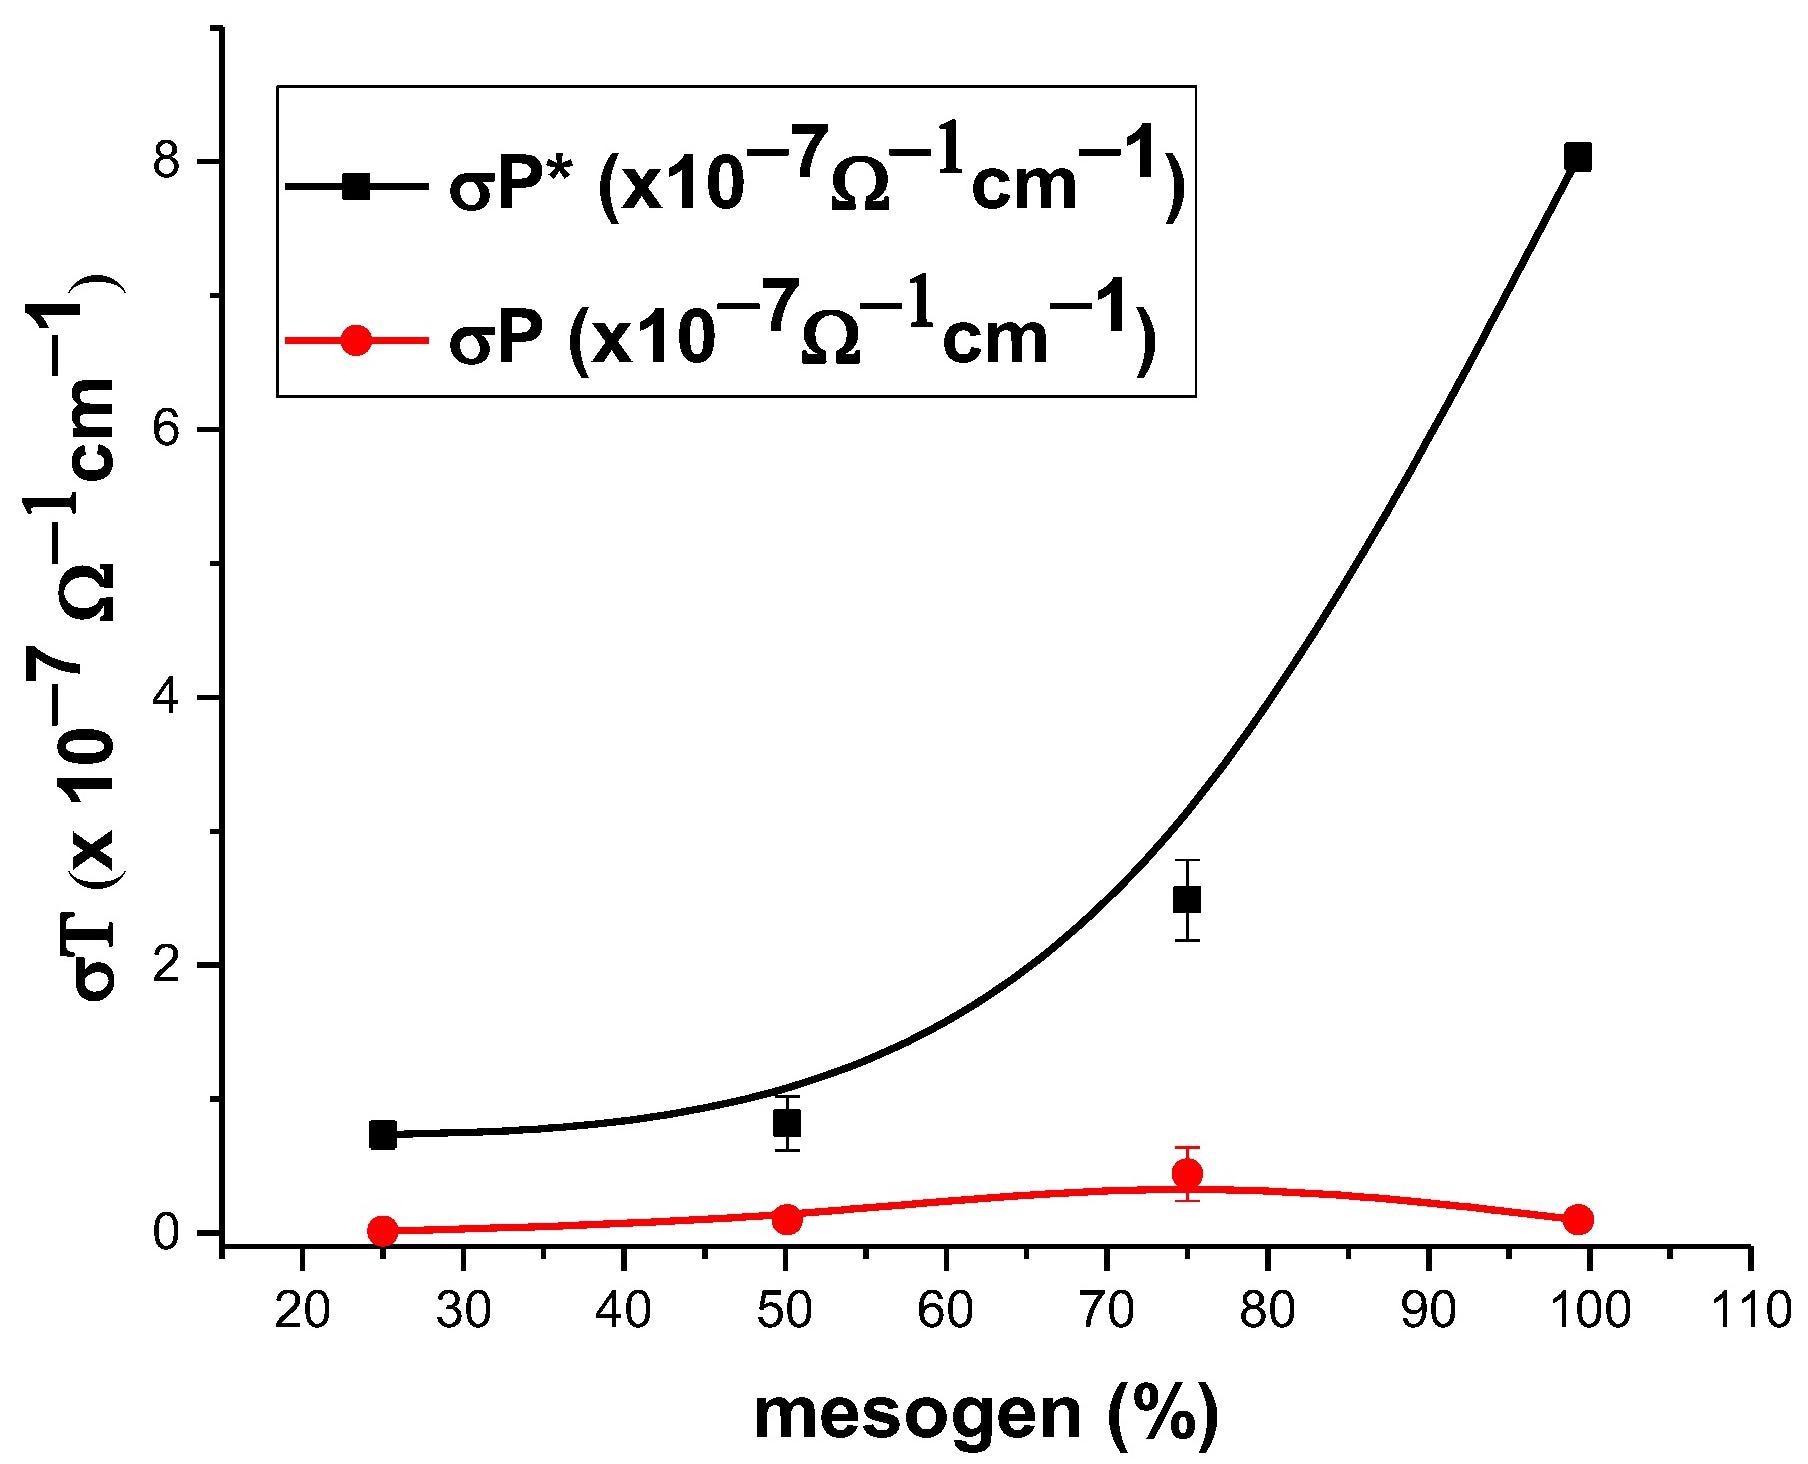 Graphical representation of the electrical conductivity versus percent of azomethine mesogens of polymers for untreated (P) and treated (P*) films.